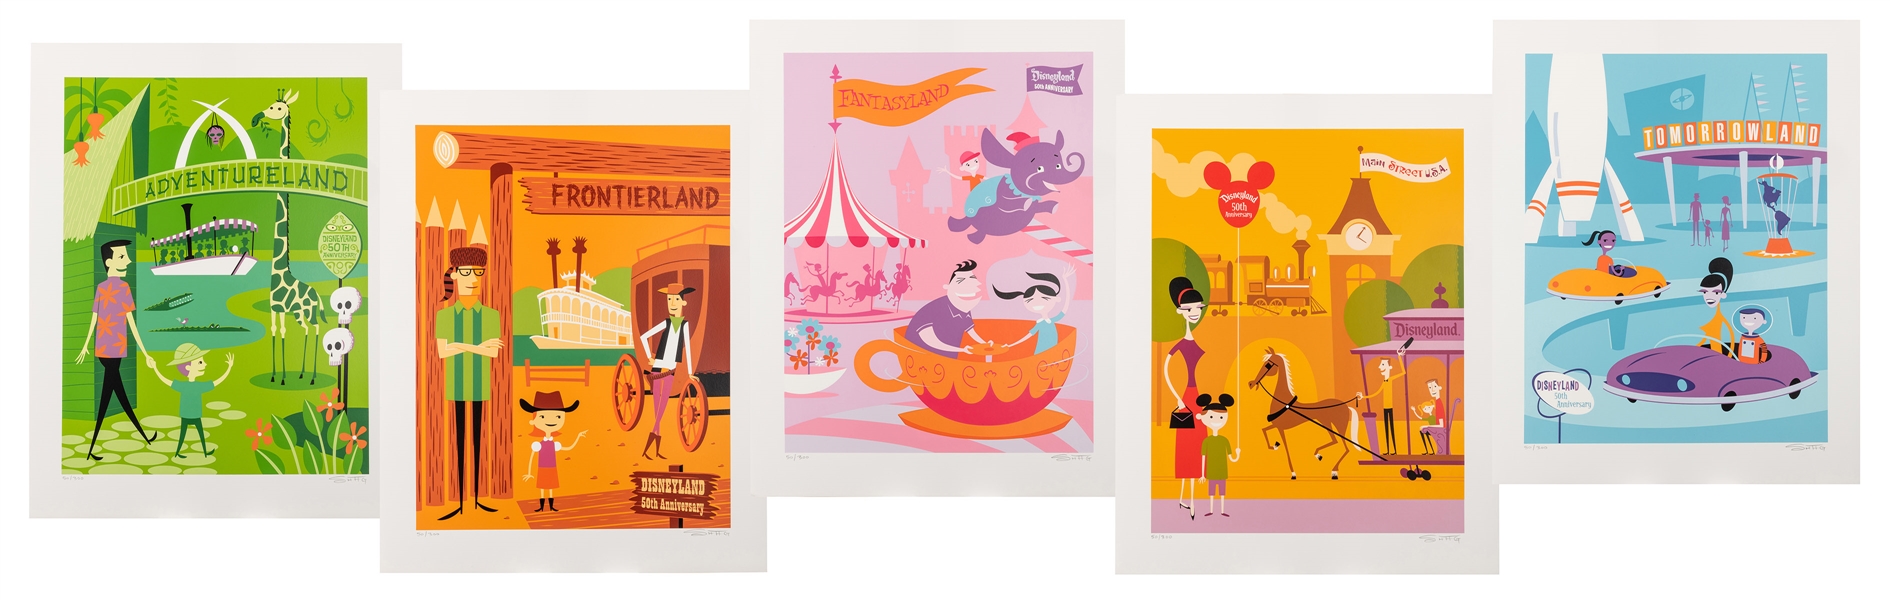 Boxed set of 5 signed lithographs by Shag for Disneyland’s 50th Anniversary.